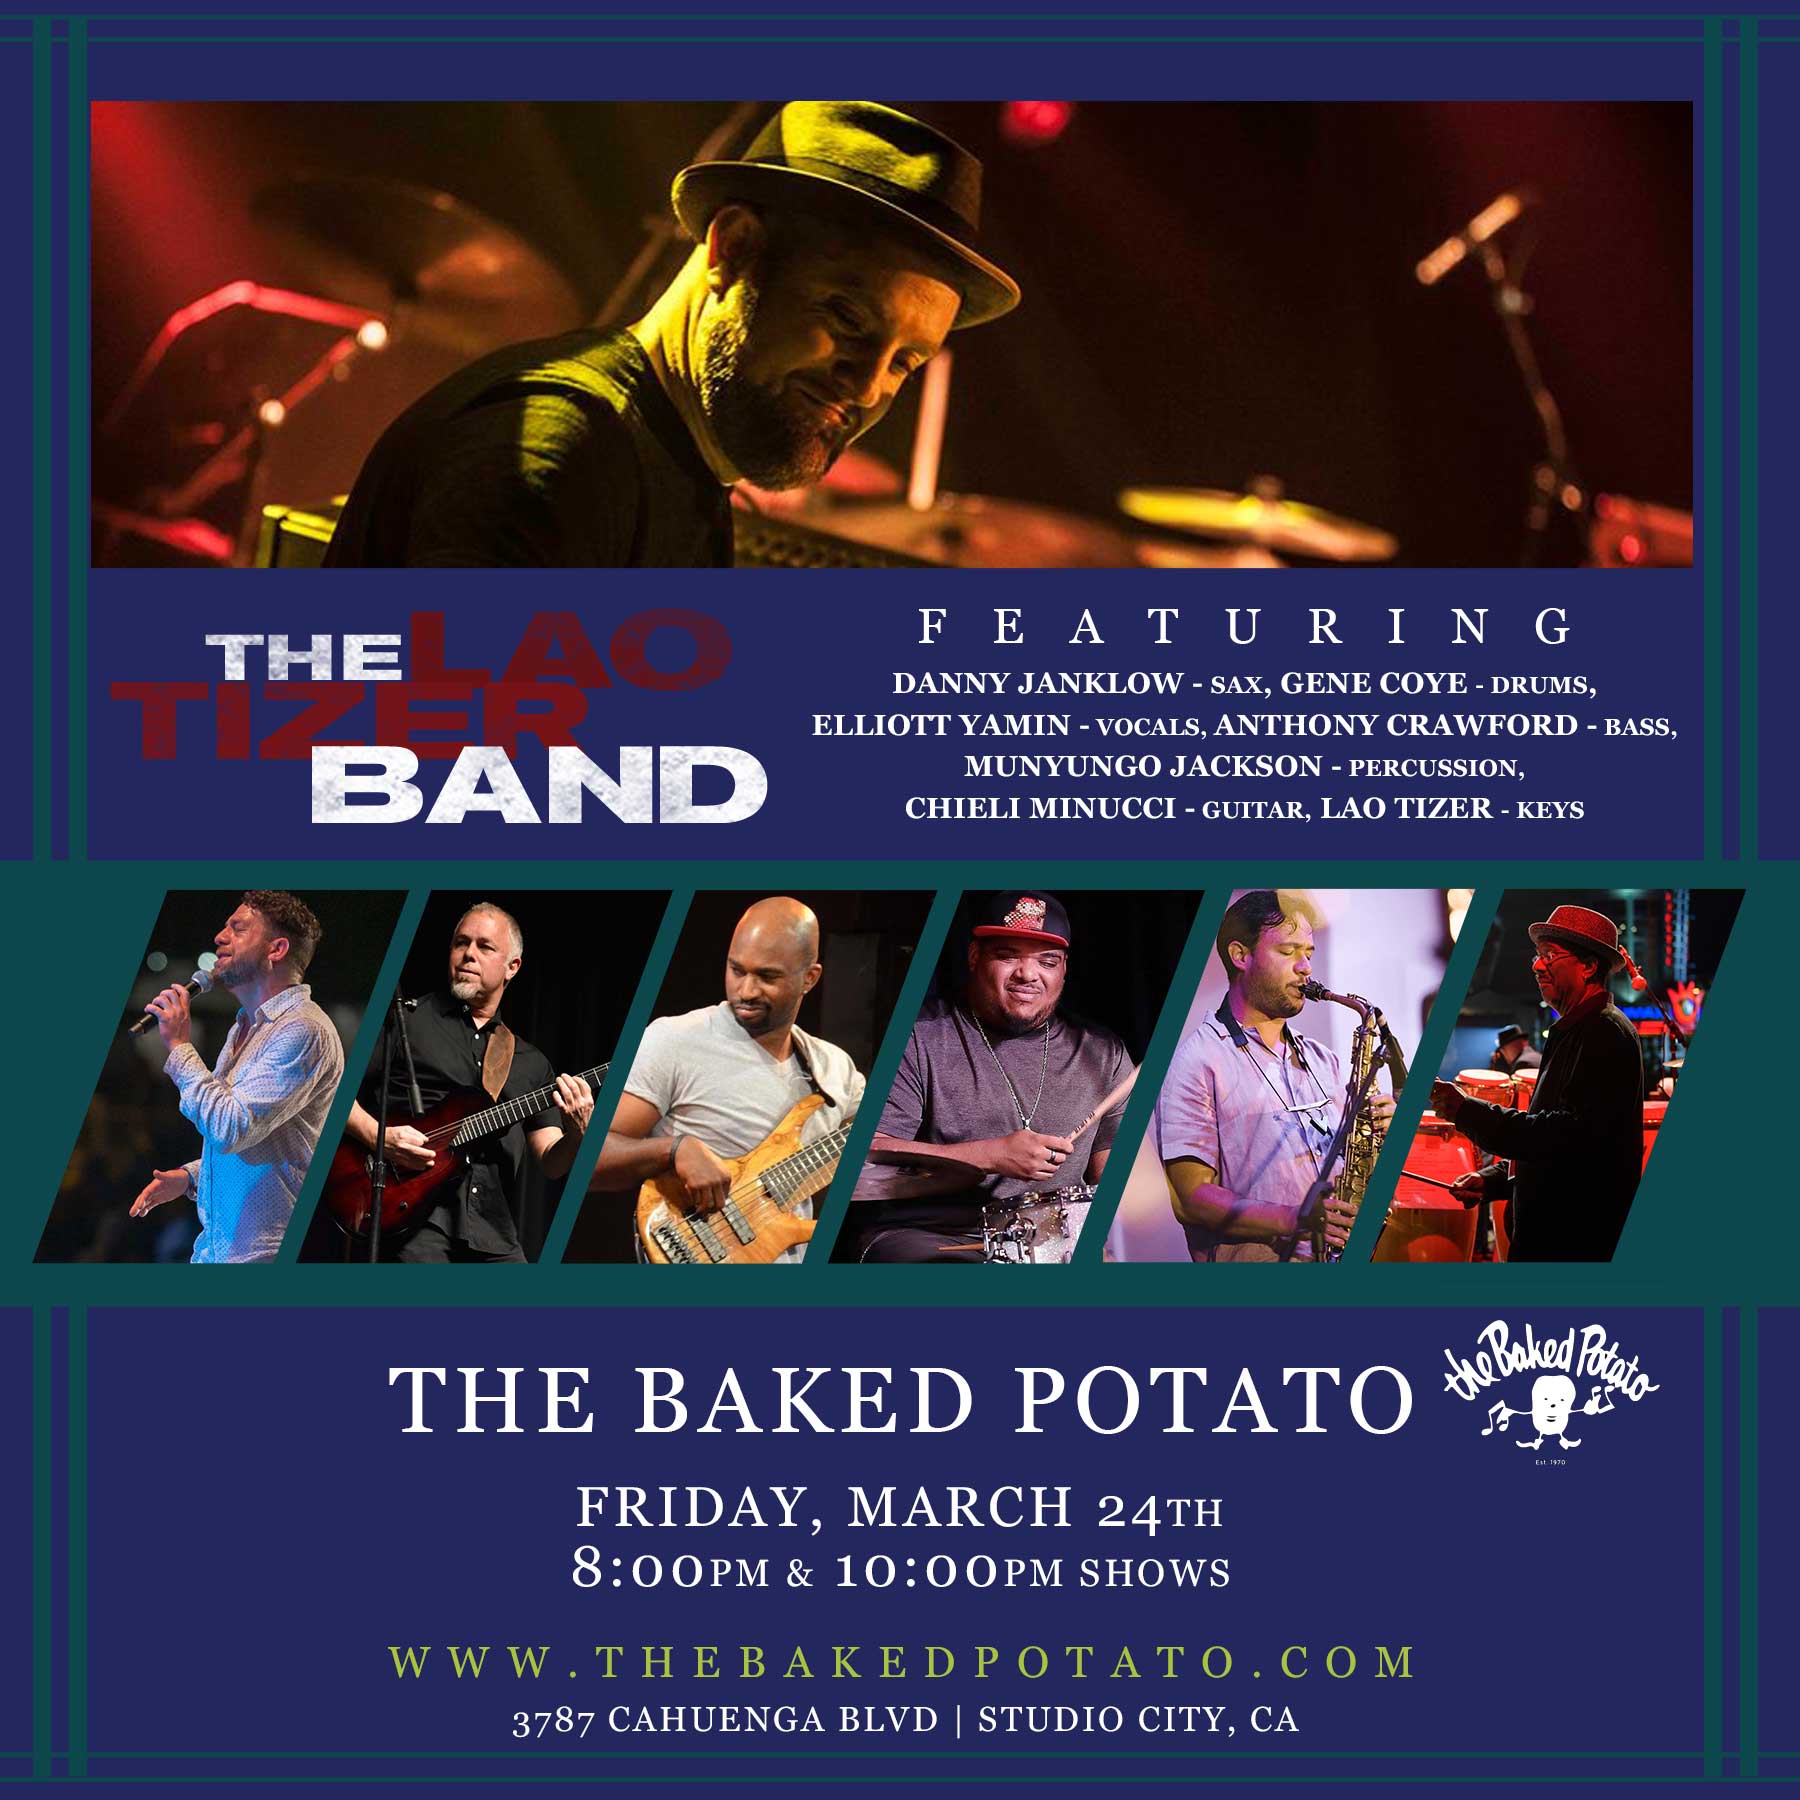 THE LAO TIZER BAND - Friday, March 24, 2023